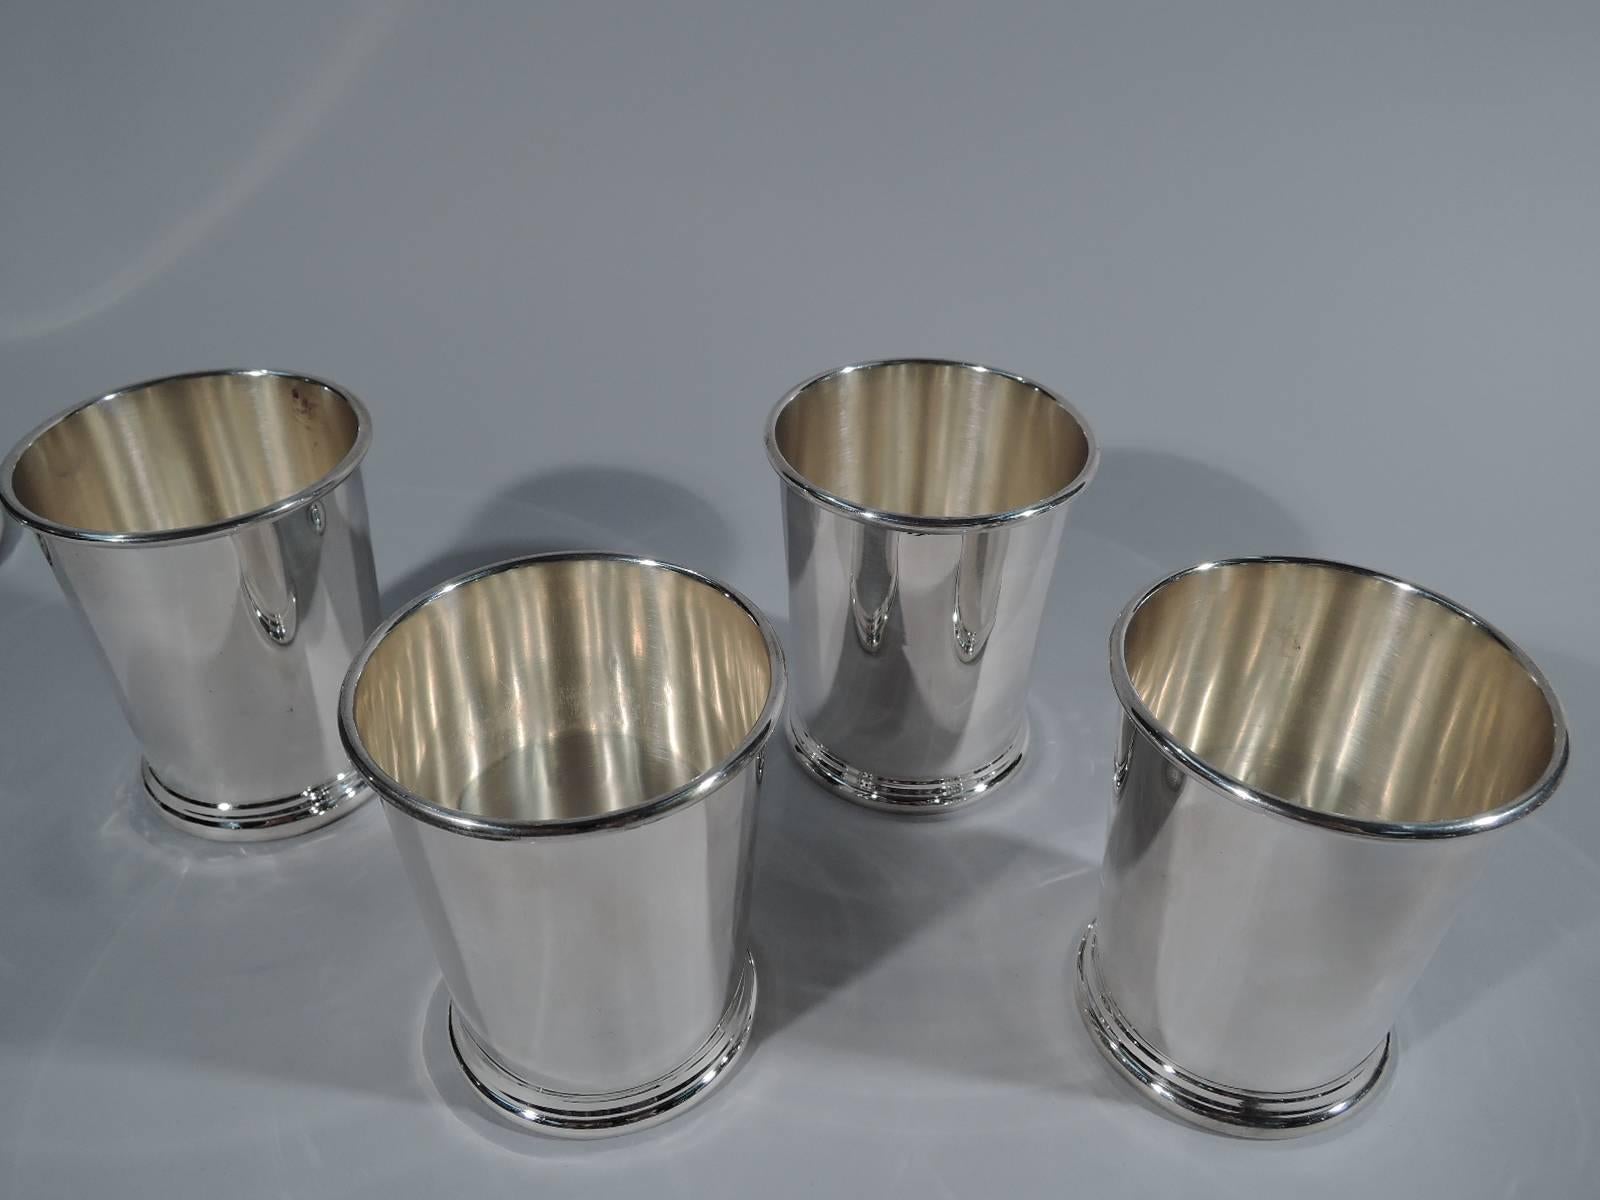 Set of four sterling silver mint juleps. Made by Preisner in Wallingford, Conn. Each: Straight and tapering sides, molded rim, and skirted base. Hallmark includes no. 140. Total weight: 18 troy ounces.